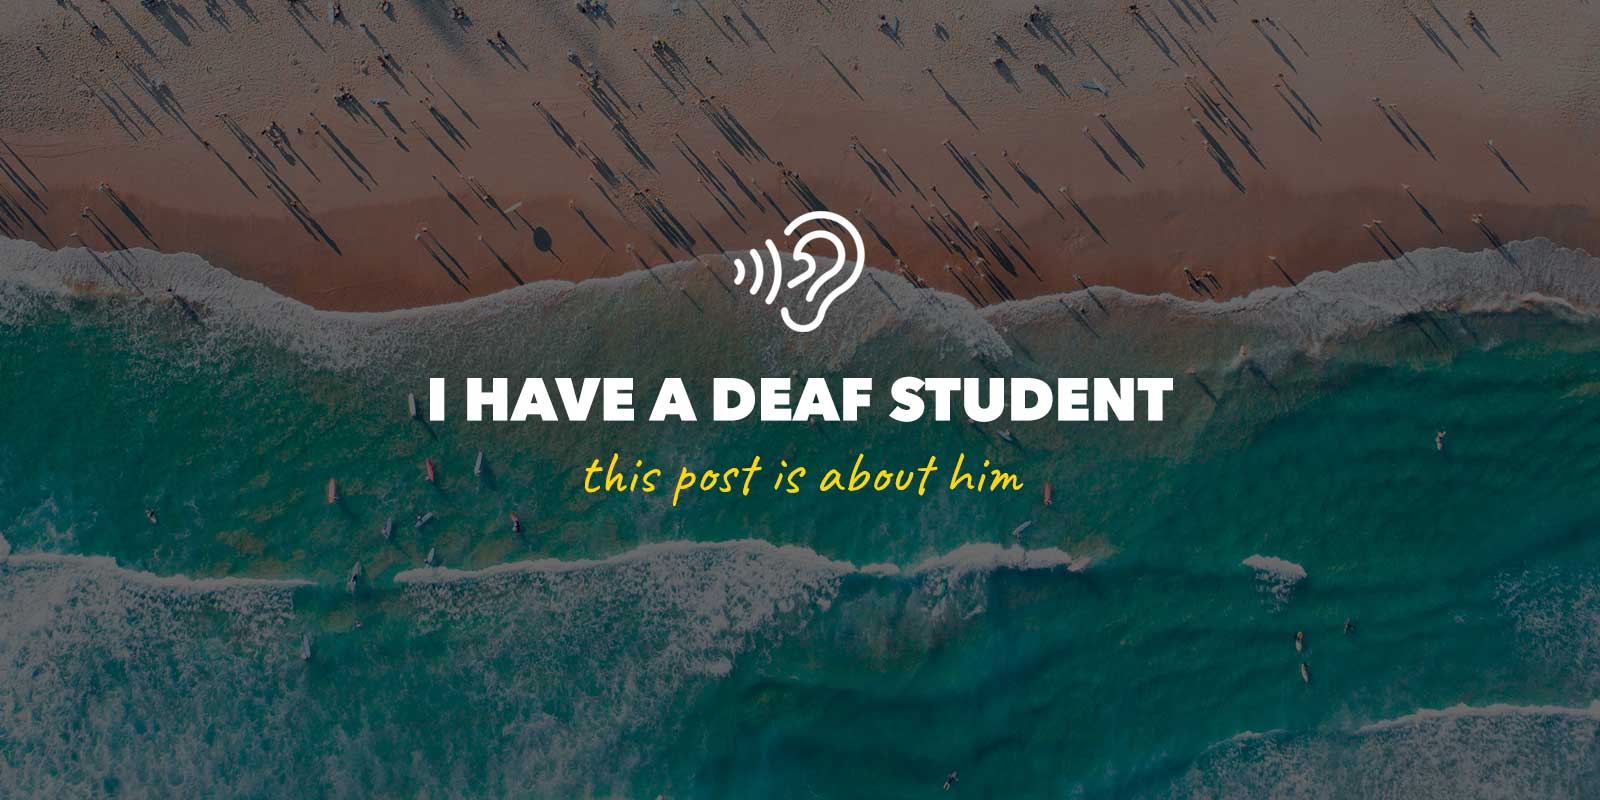 I have a deaf student. This post is about him.